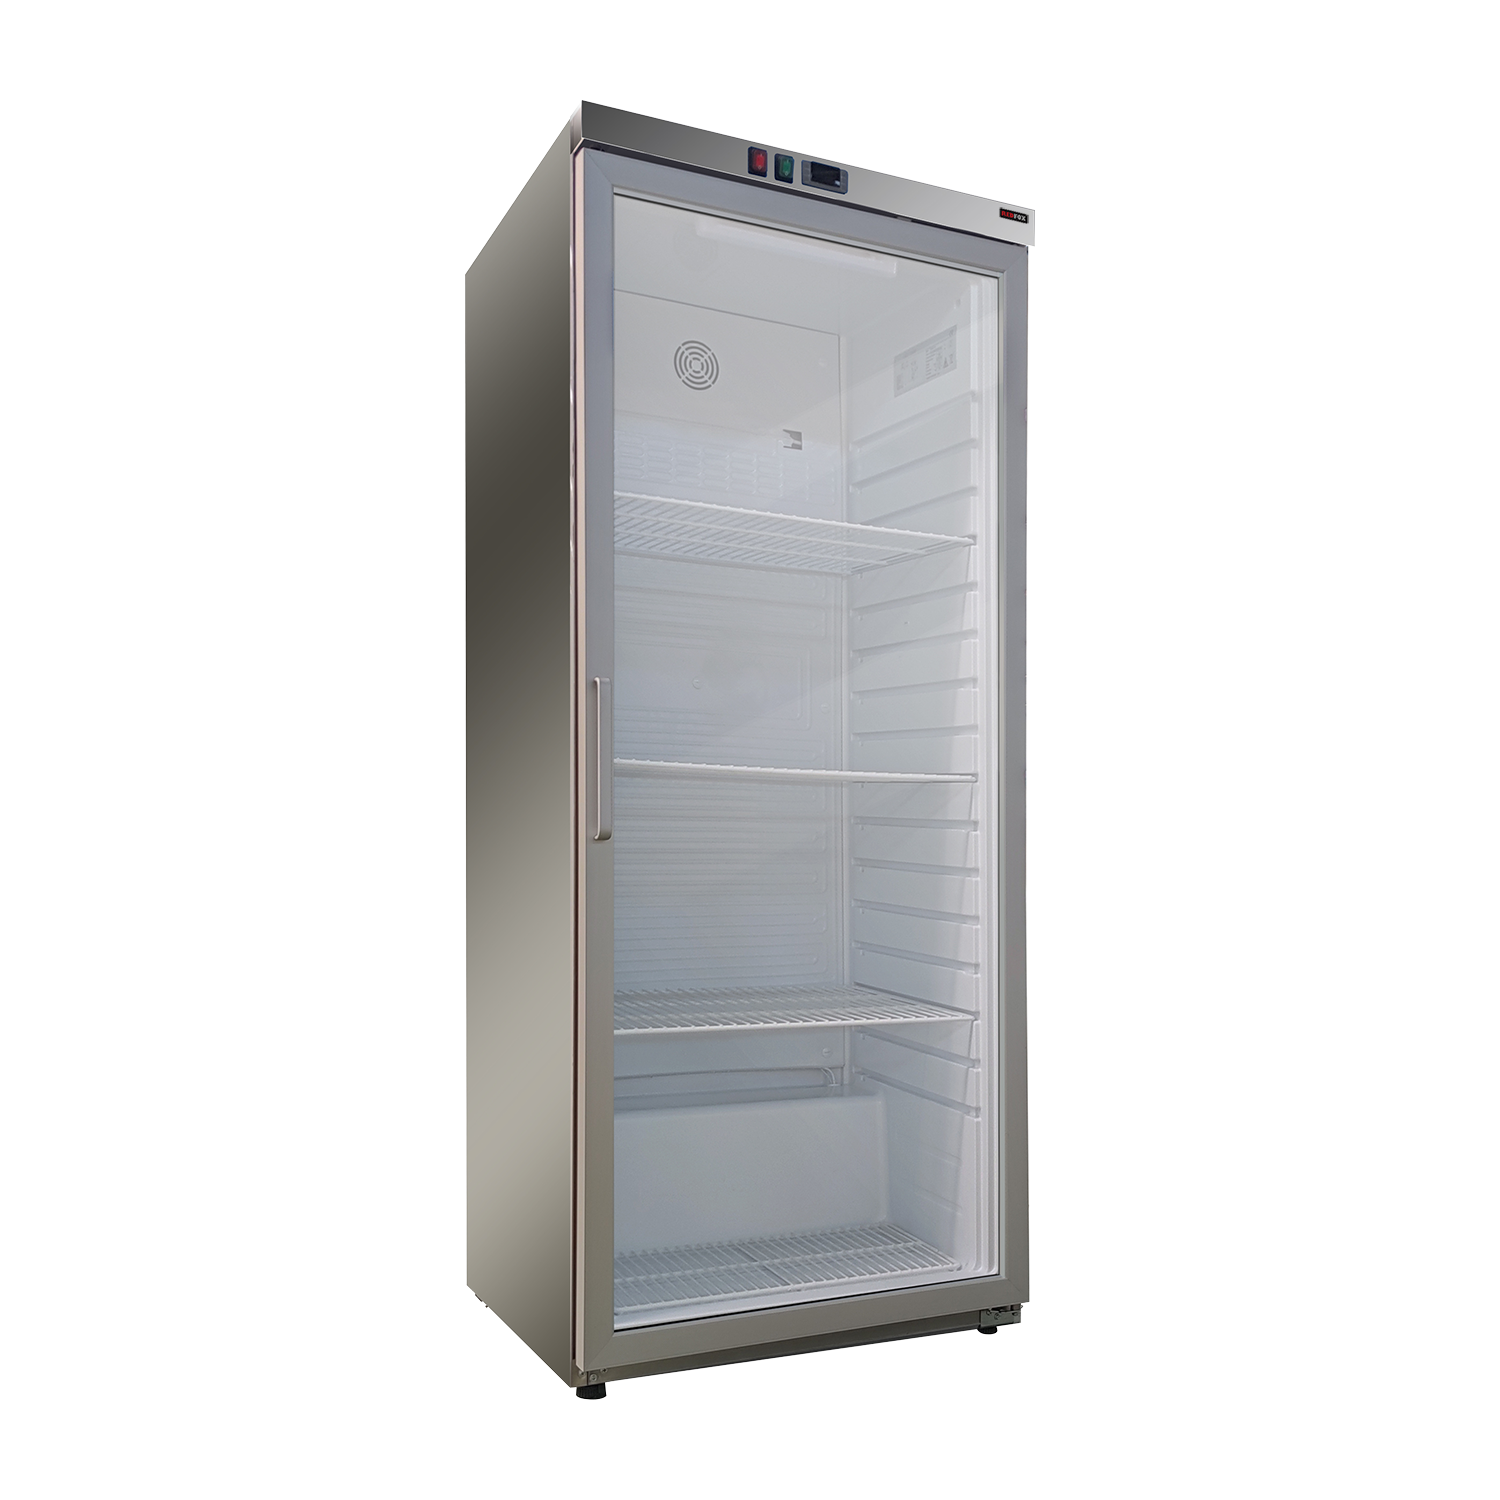 Cooling cabinet 350 l, glass door, stainless steel | REDFOX - DRR 400 GS